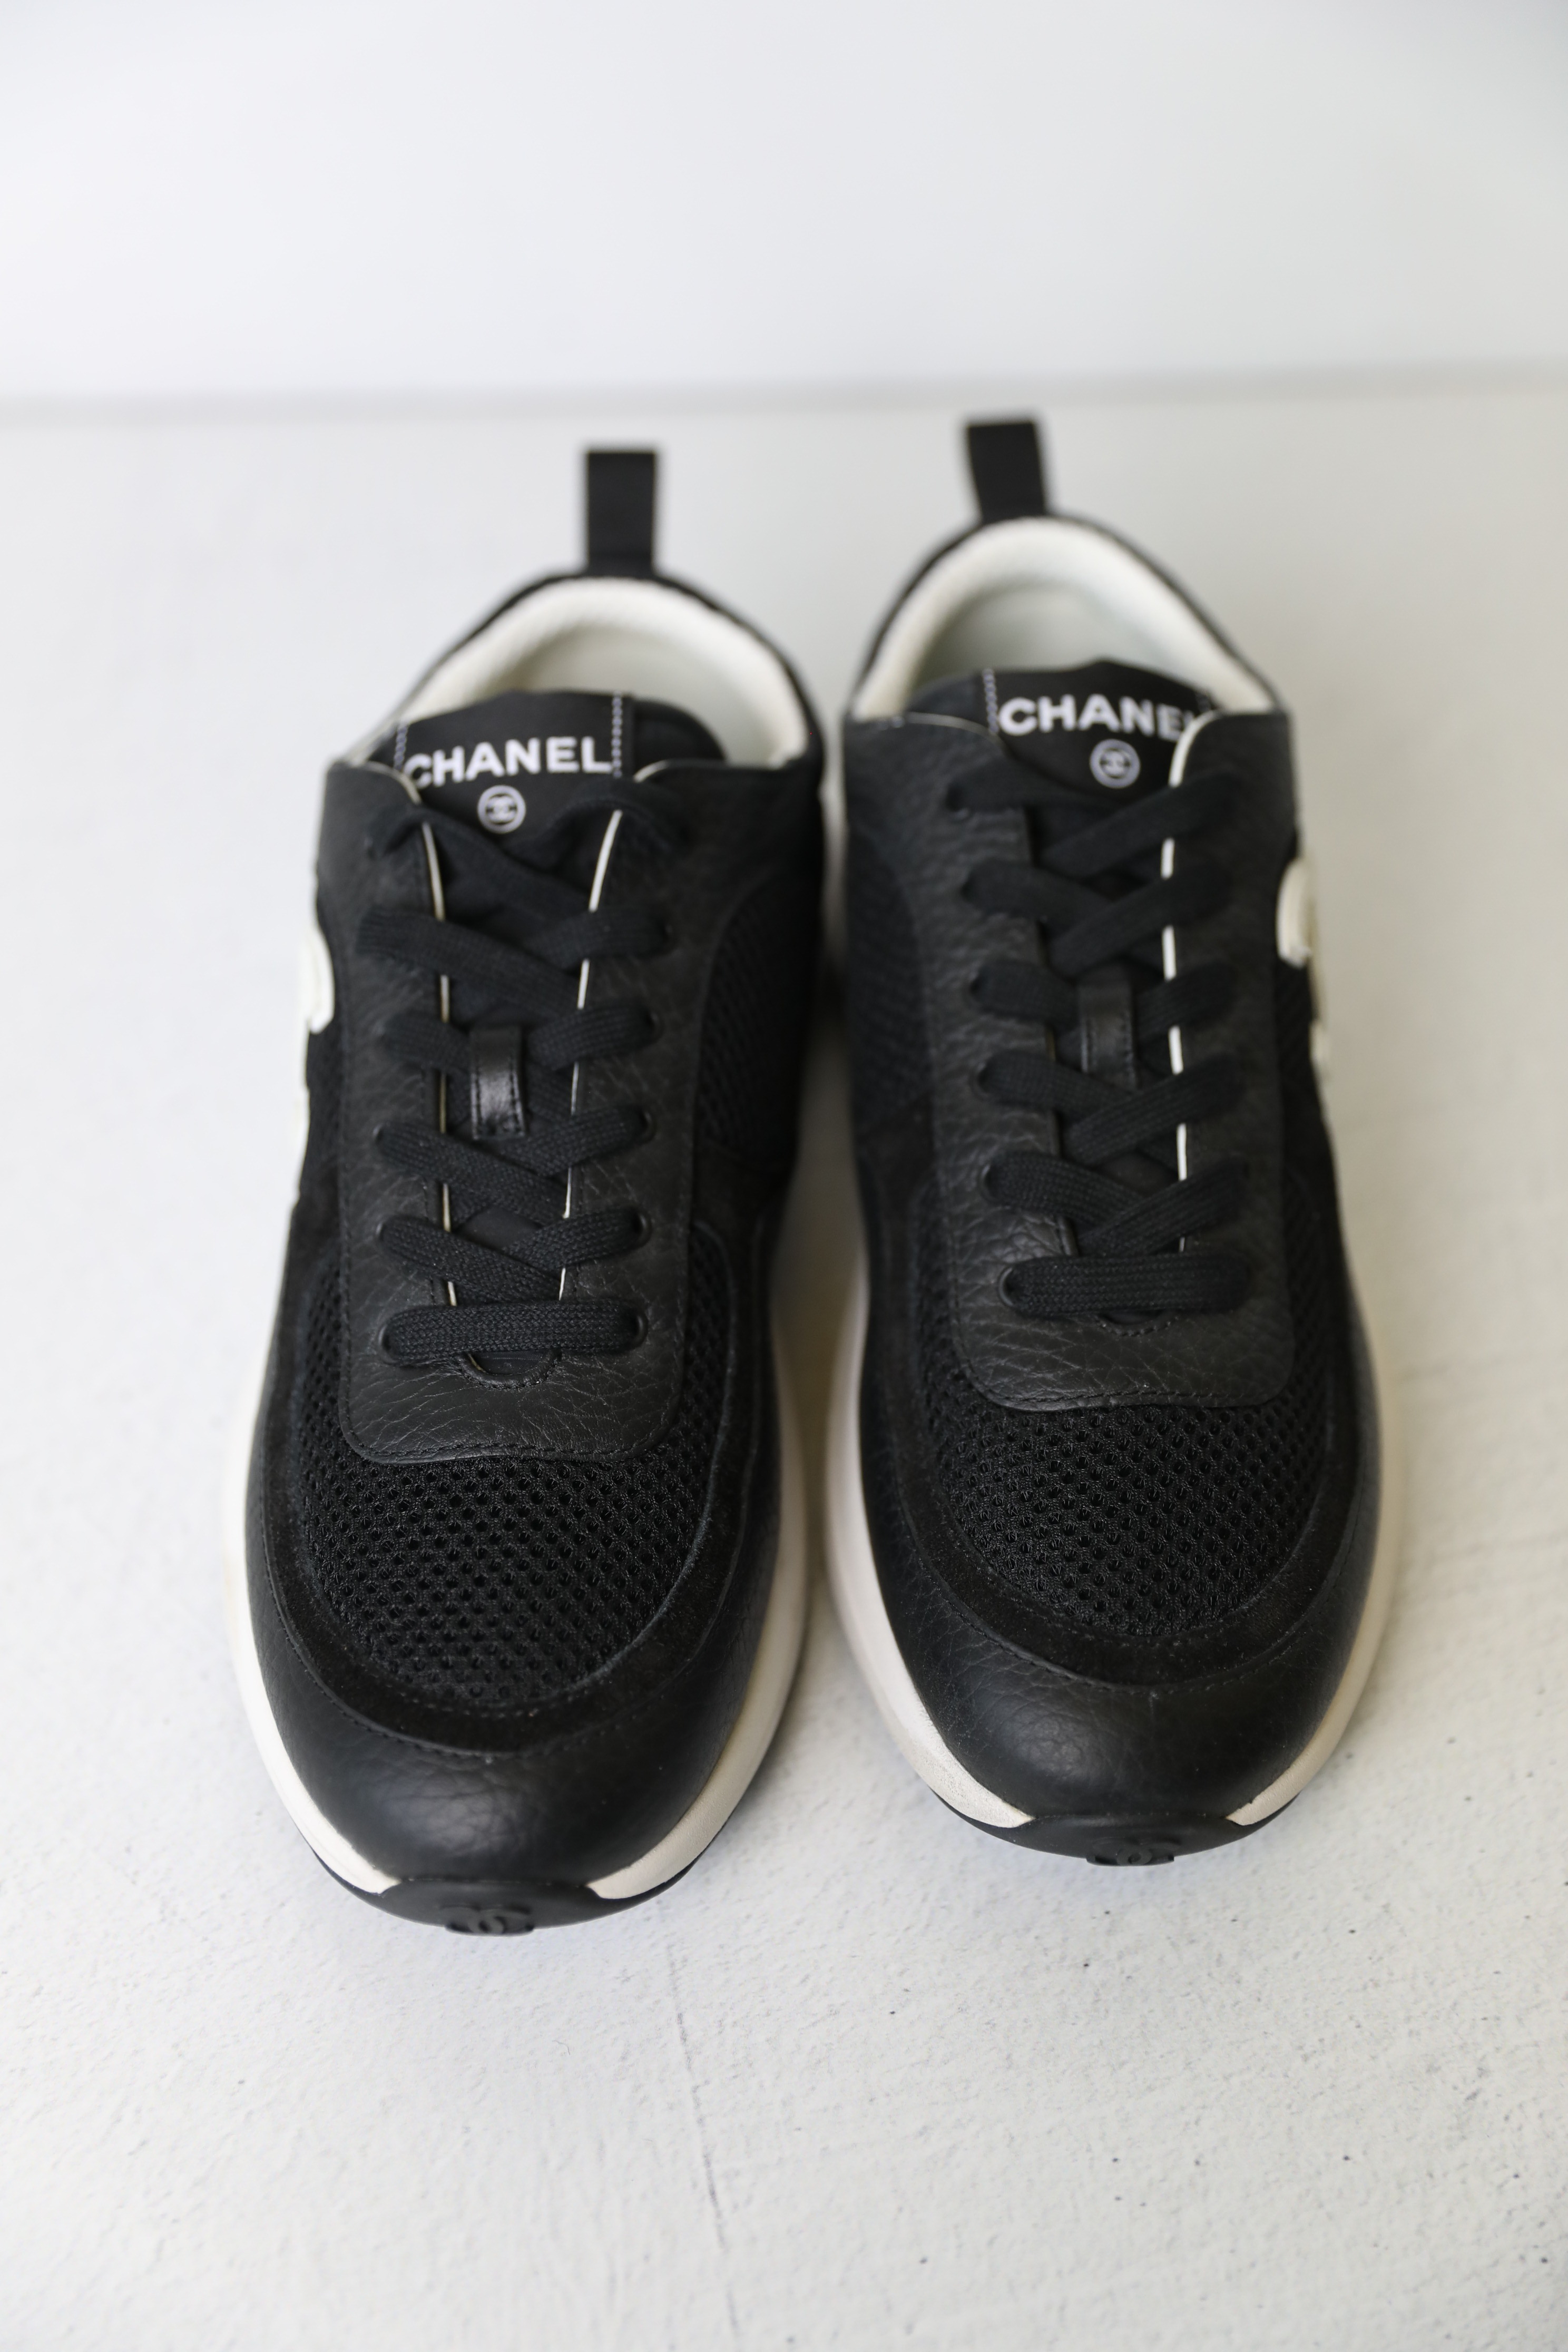 Chanel Sneakers, Black and White, Size 40, New in Box WA001